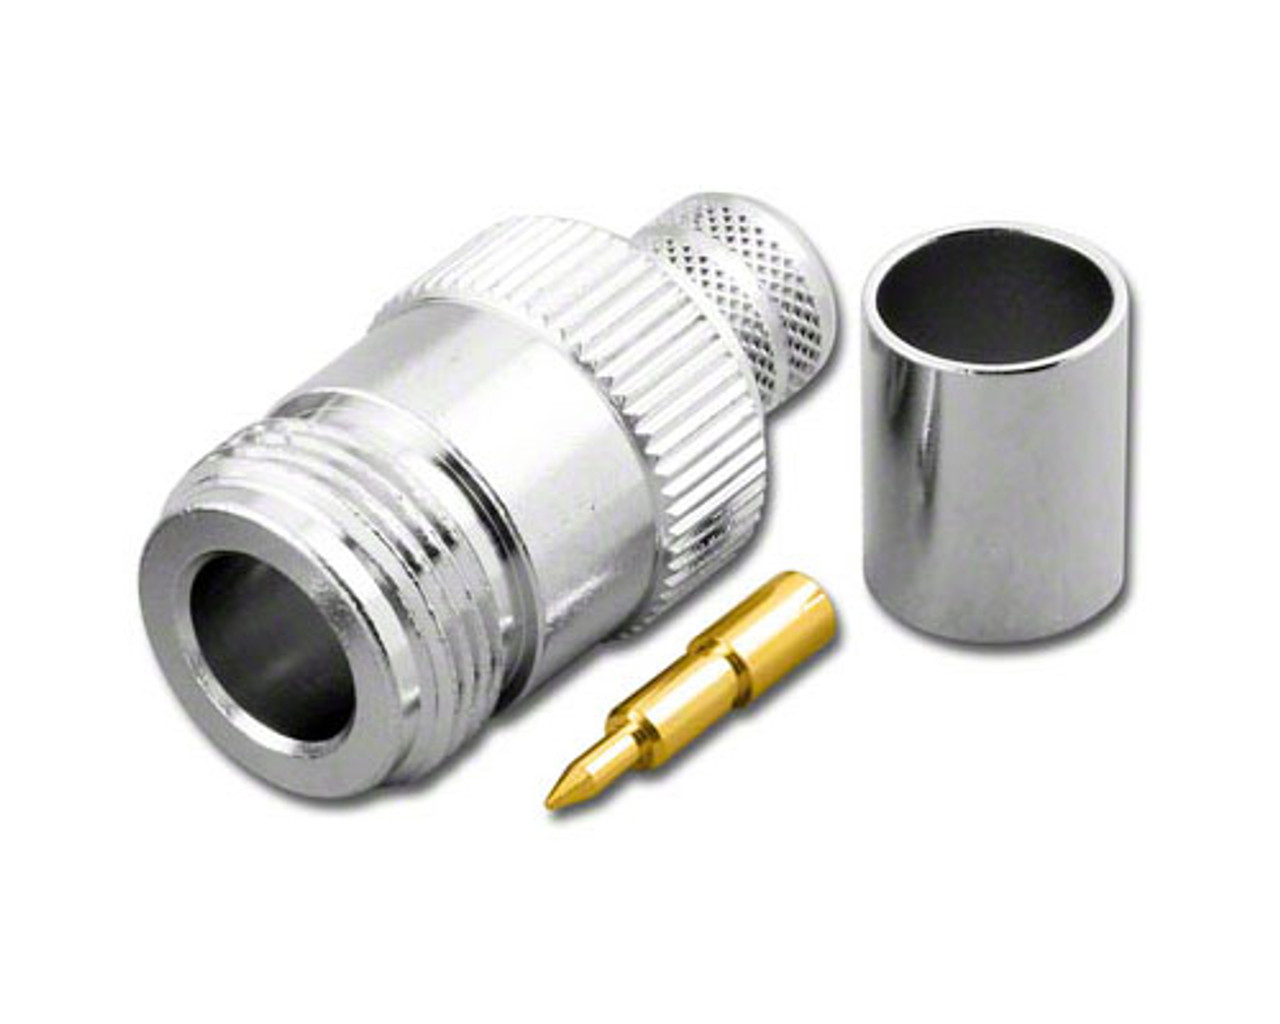 RP-N Female Jack Crimp Connector for LMR400 RG-8 RG-213 Coaxial Cable